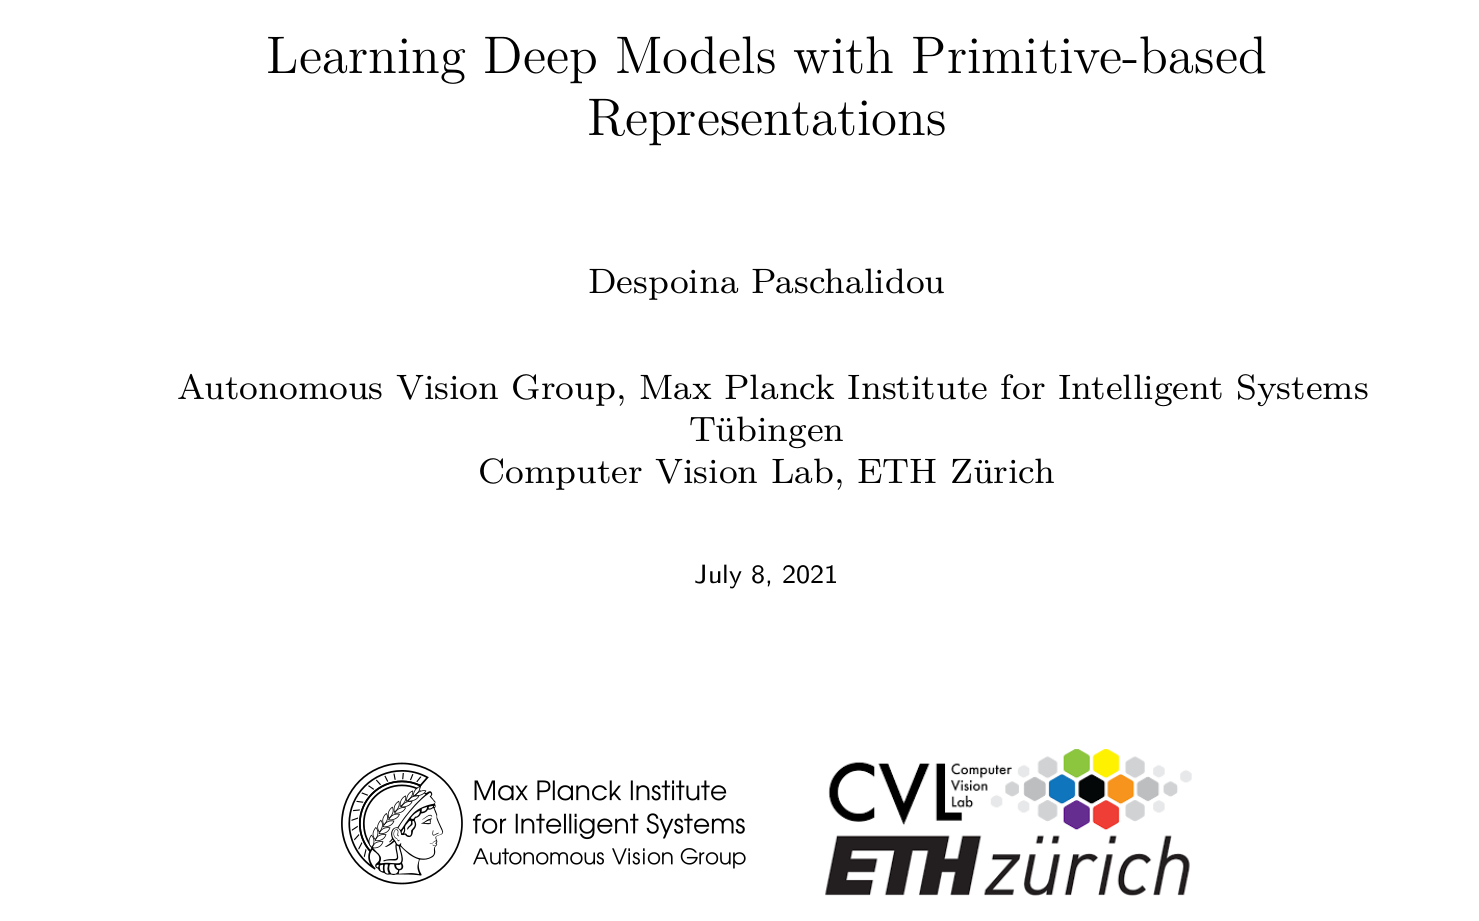 Learning Deep Models with Primitive-based Representations